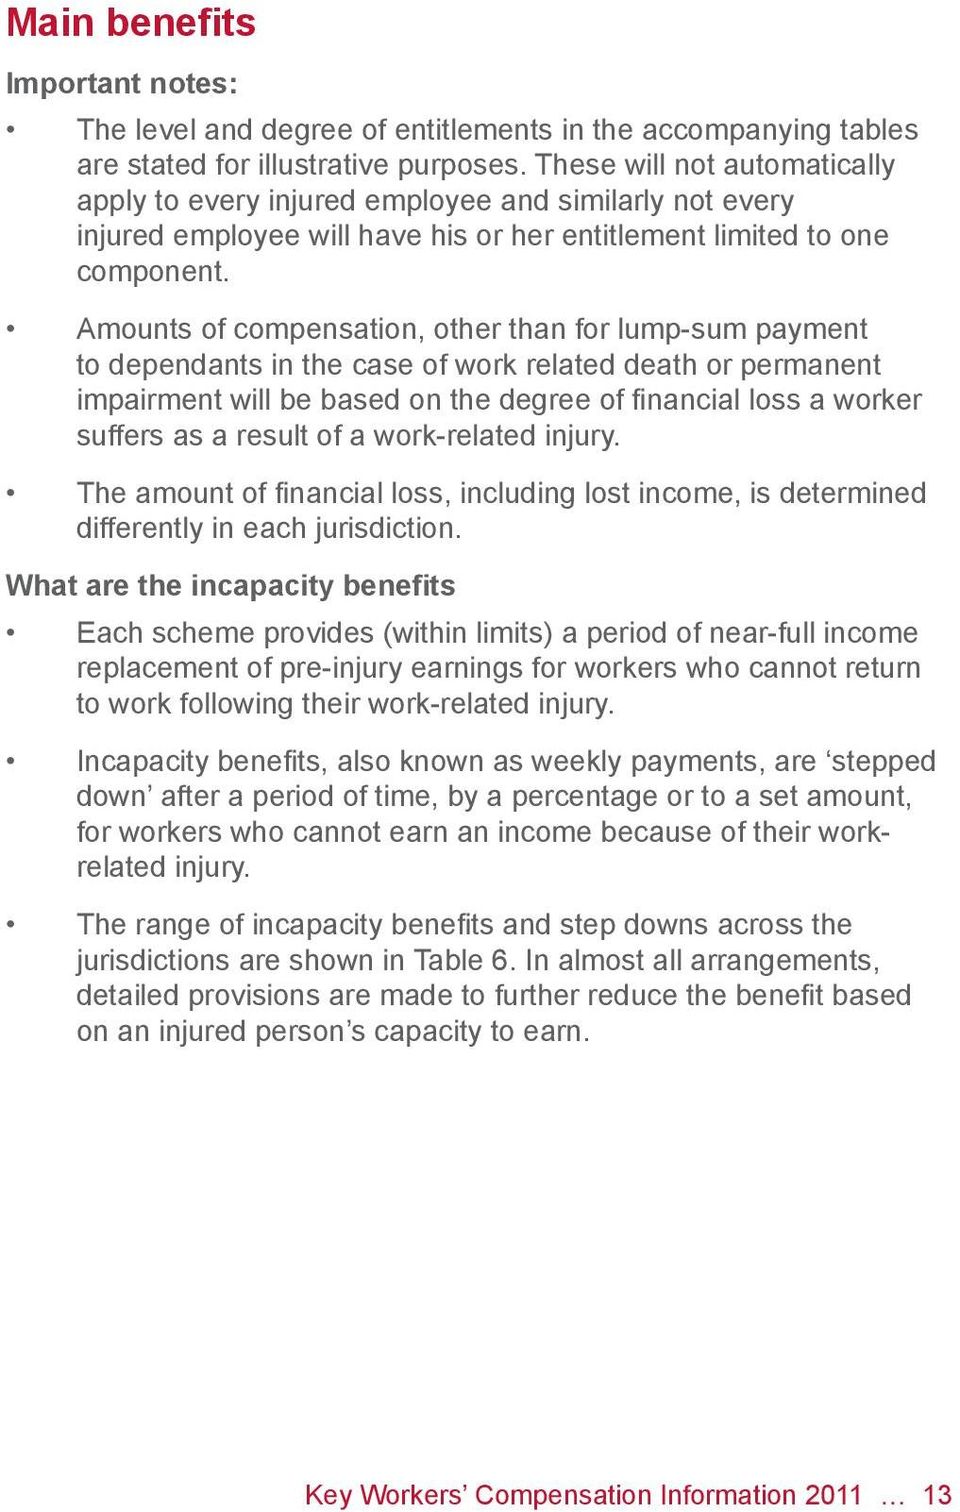 Amounts of compensation, other than for lump-sum payment to dependants in the case of work related death or permanent impairment will be based on the degree of financial loss a worker suffers as a